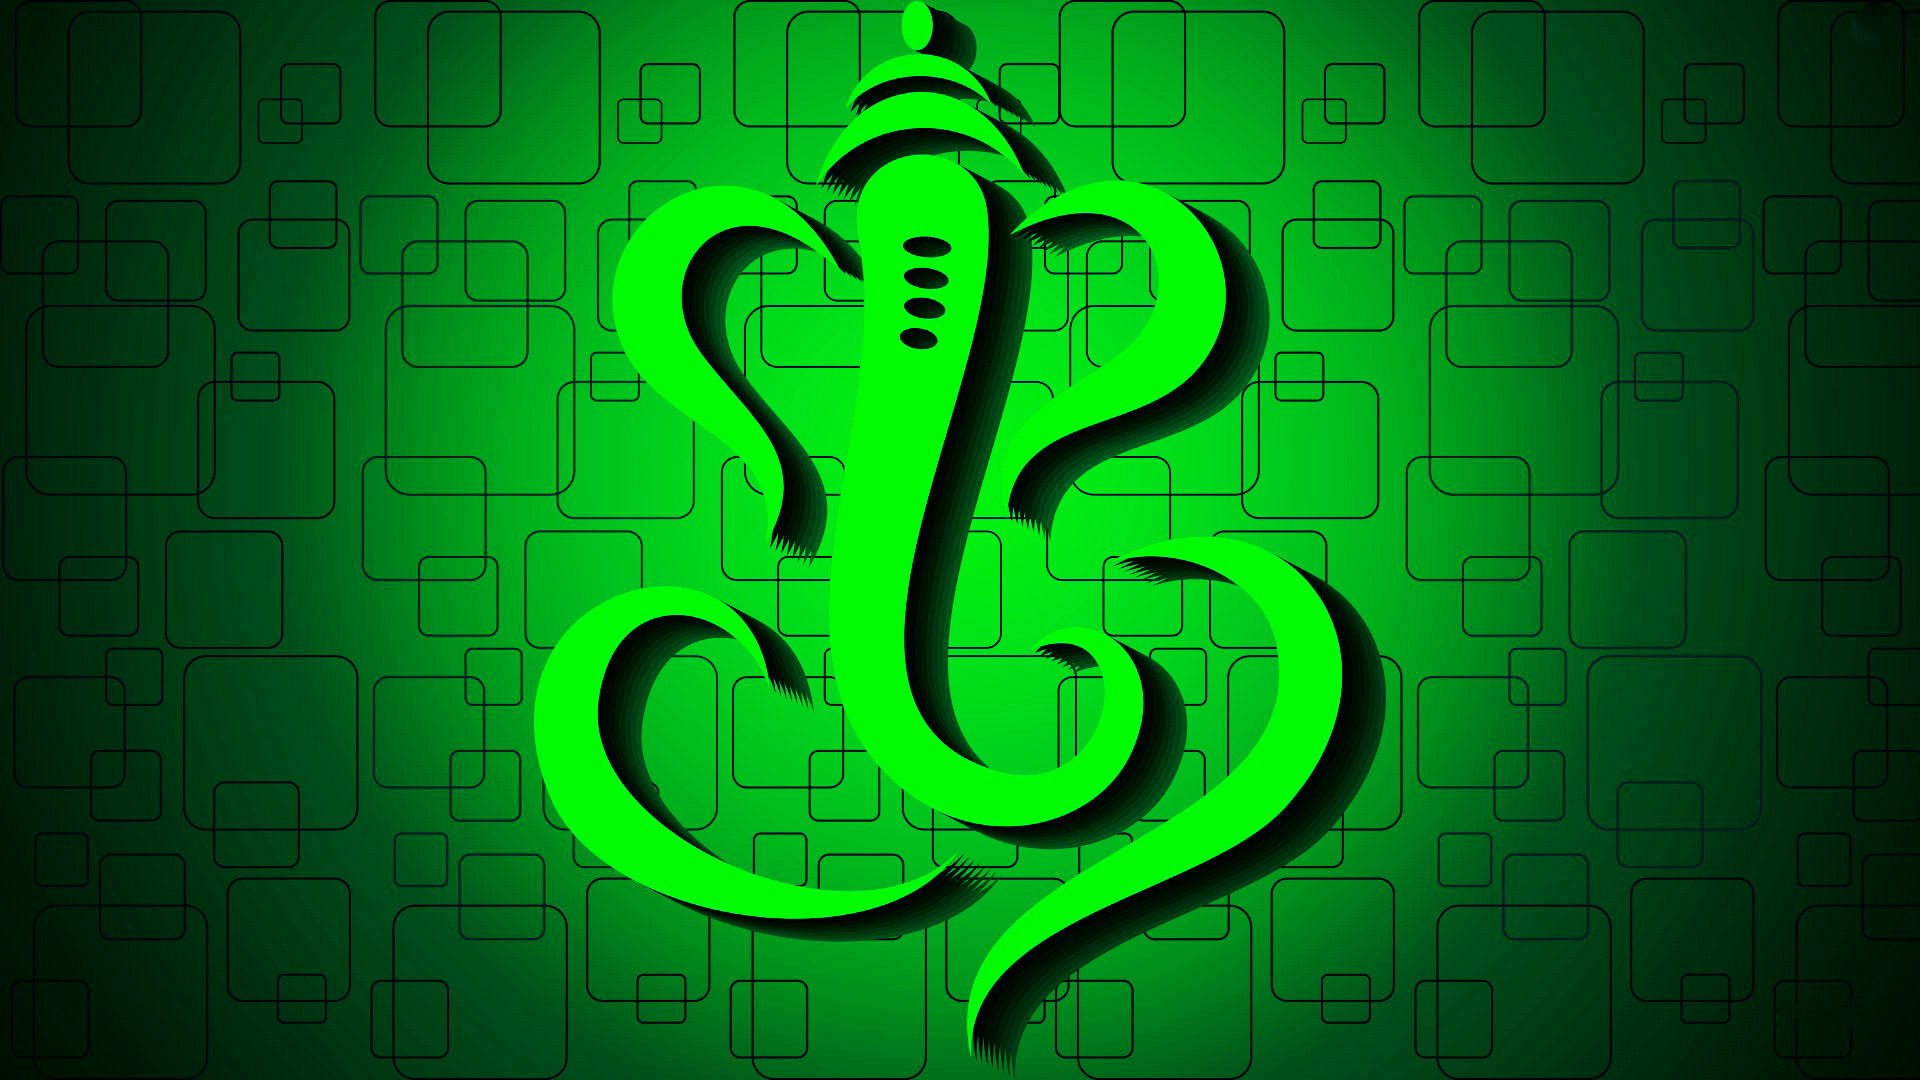 Lord Shree Ganesh HD Images, Wallpapers 2016 - Free Download 